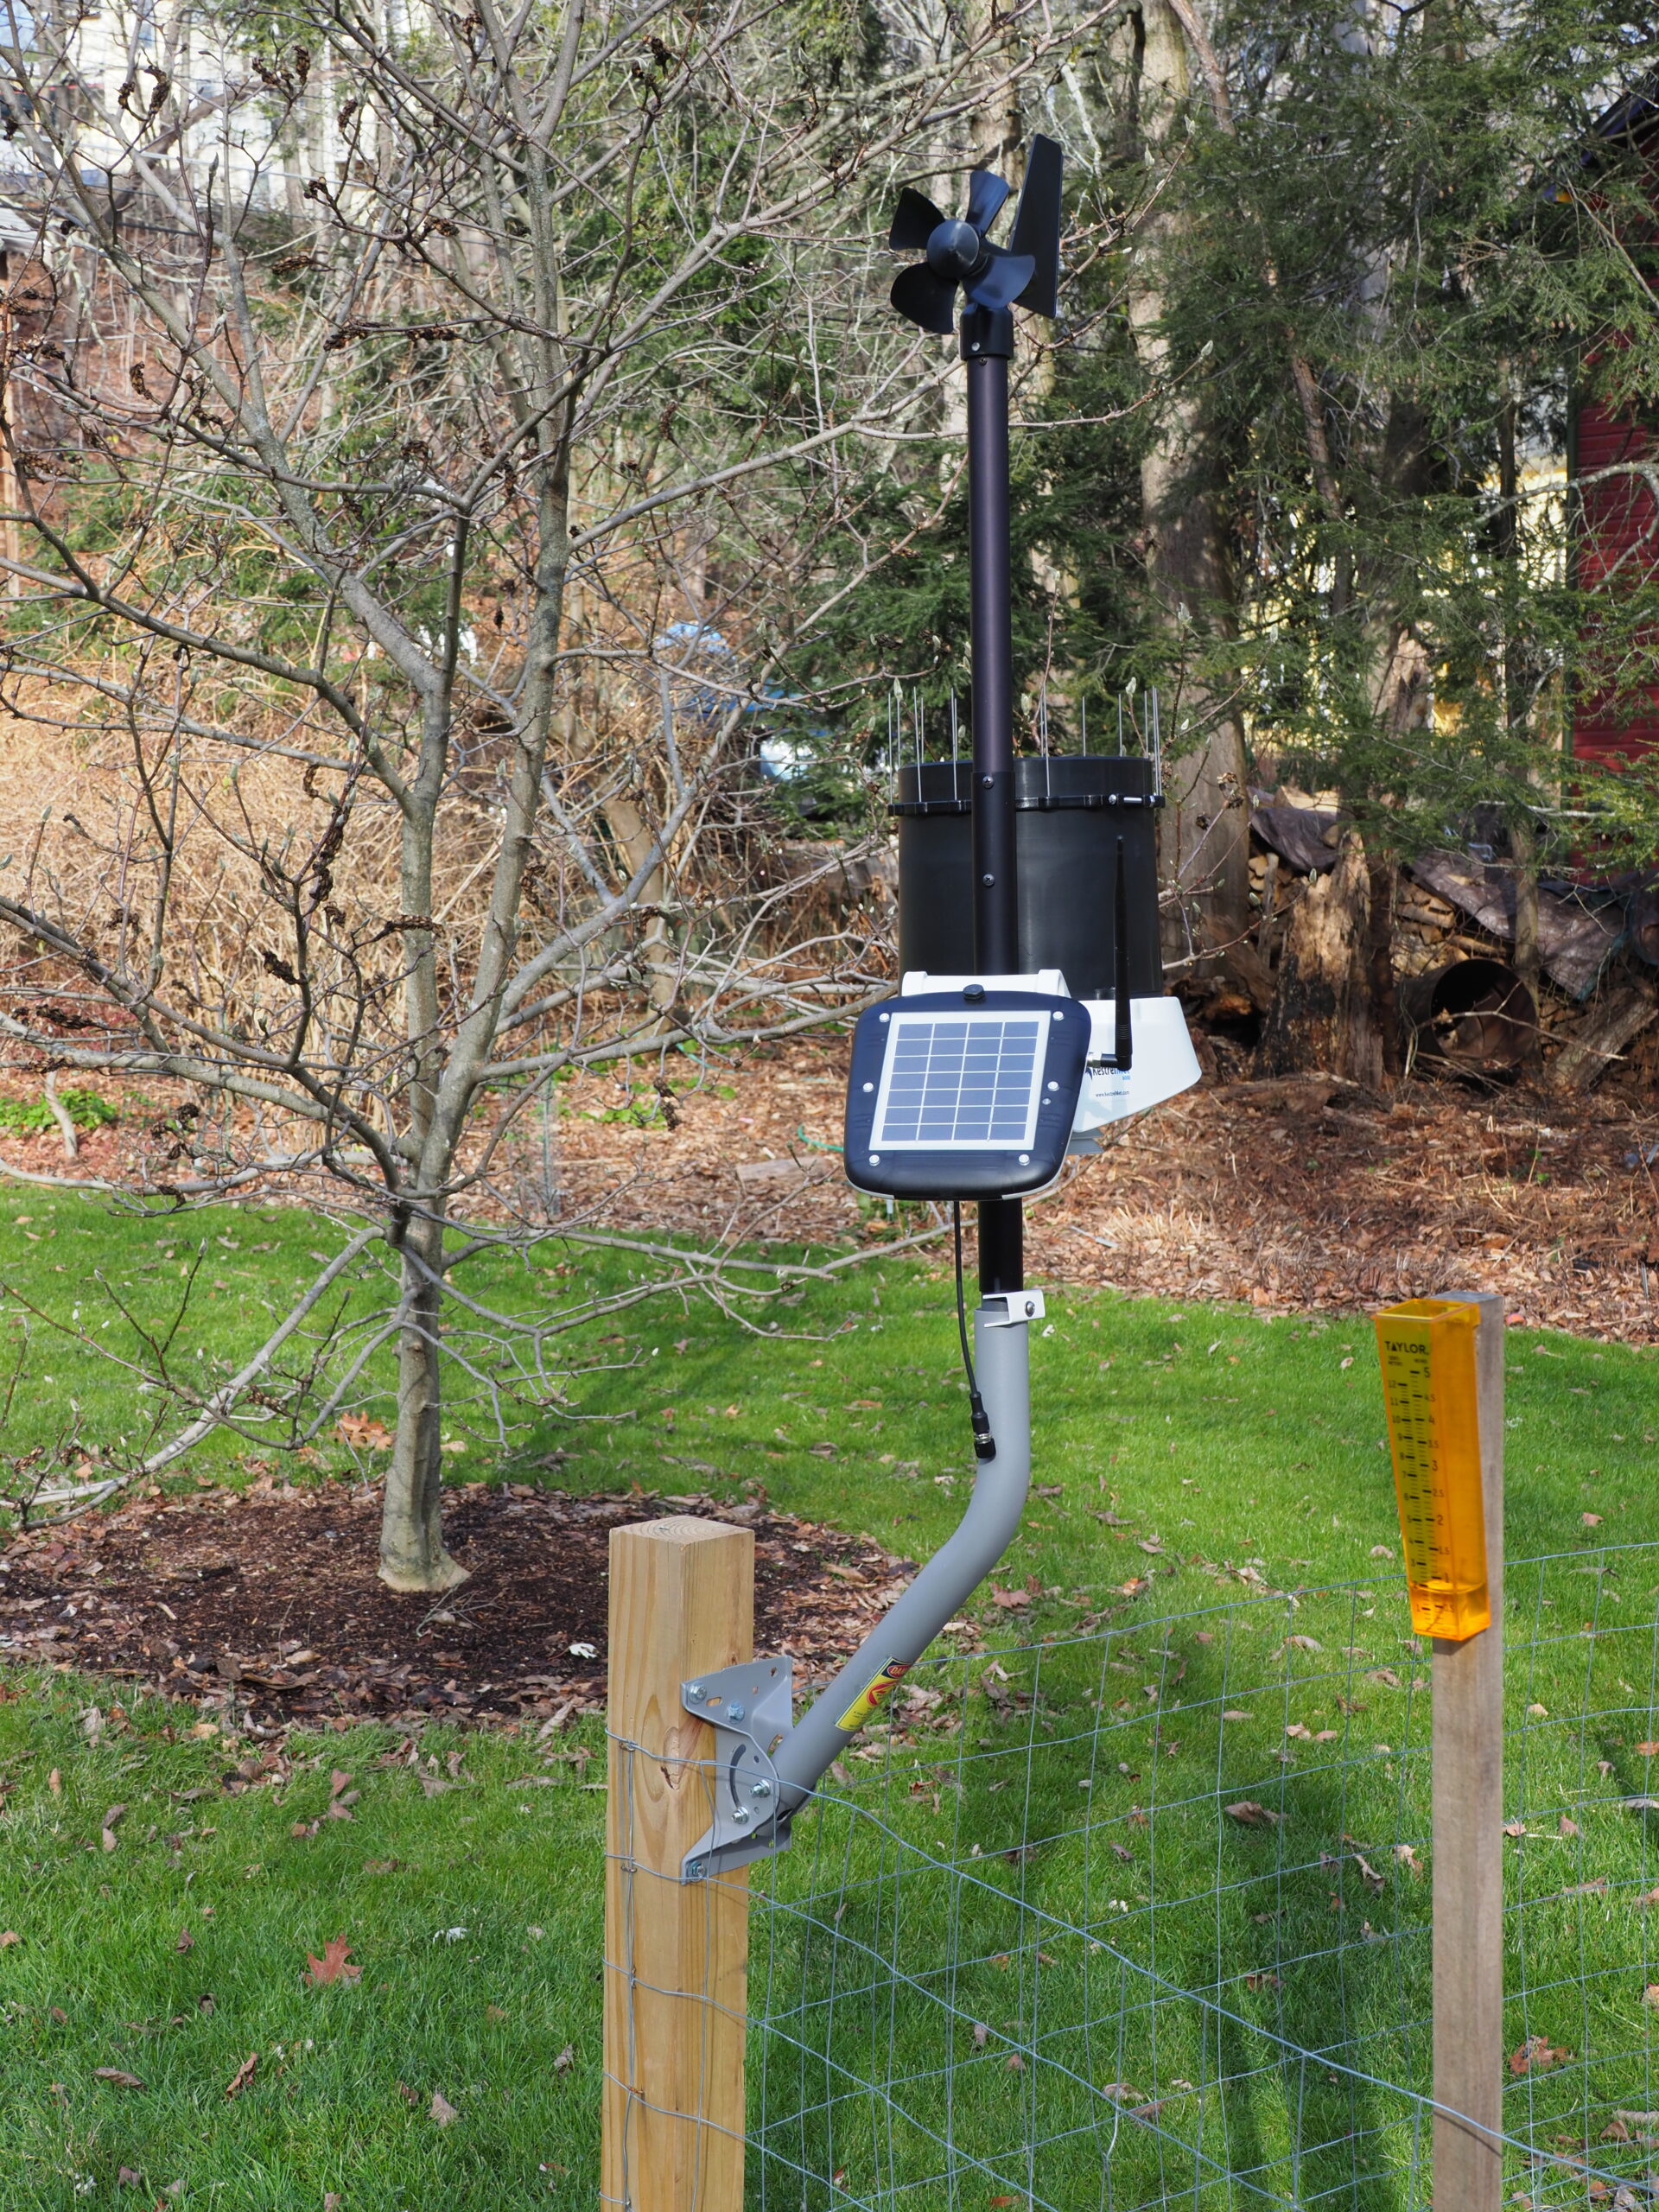 The Kestrel 6000 (WS 6000) from Ambient Weather. This is the largest of the four units tested and it’s mounted on a steel mast attached to a 4x4 pressure treated post sunk 3 feet into the ground.  On top is the propeller-type anemometer/wind vane. Below that is the rain collector (with spikes to keep birds out). In the front (facing) is the solar panel with the cell antenna on the right of the solar panel. This came in a large box and was easy to assemble and set up. To the right is the plastic 